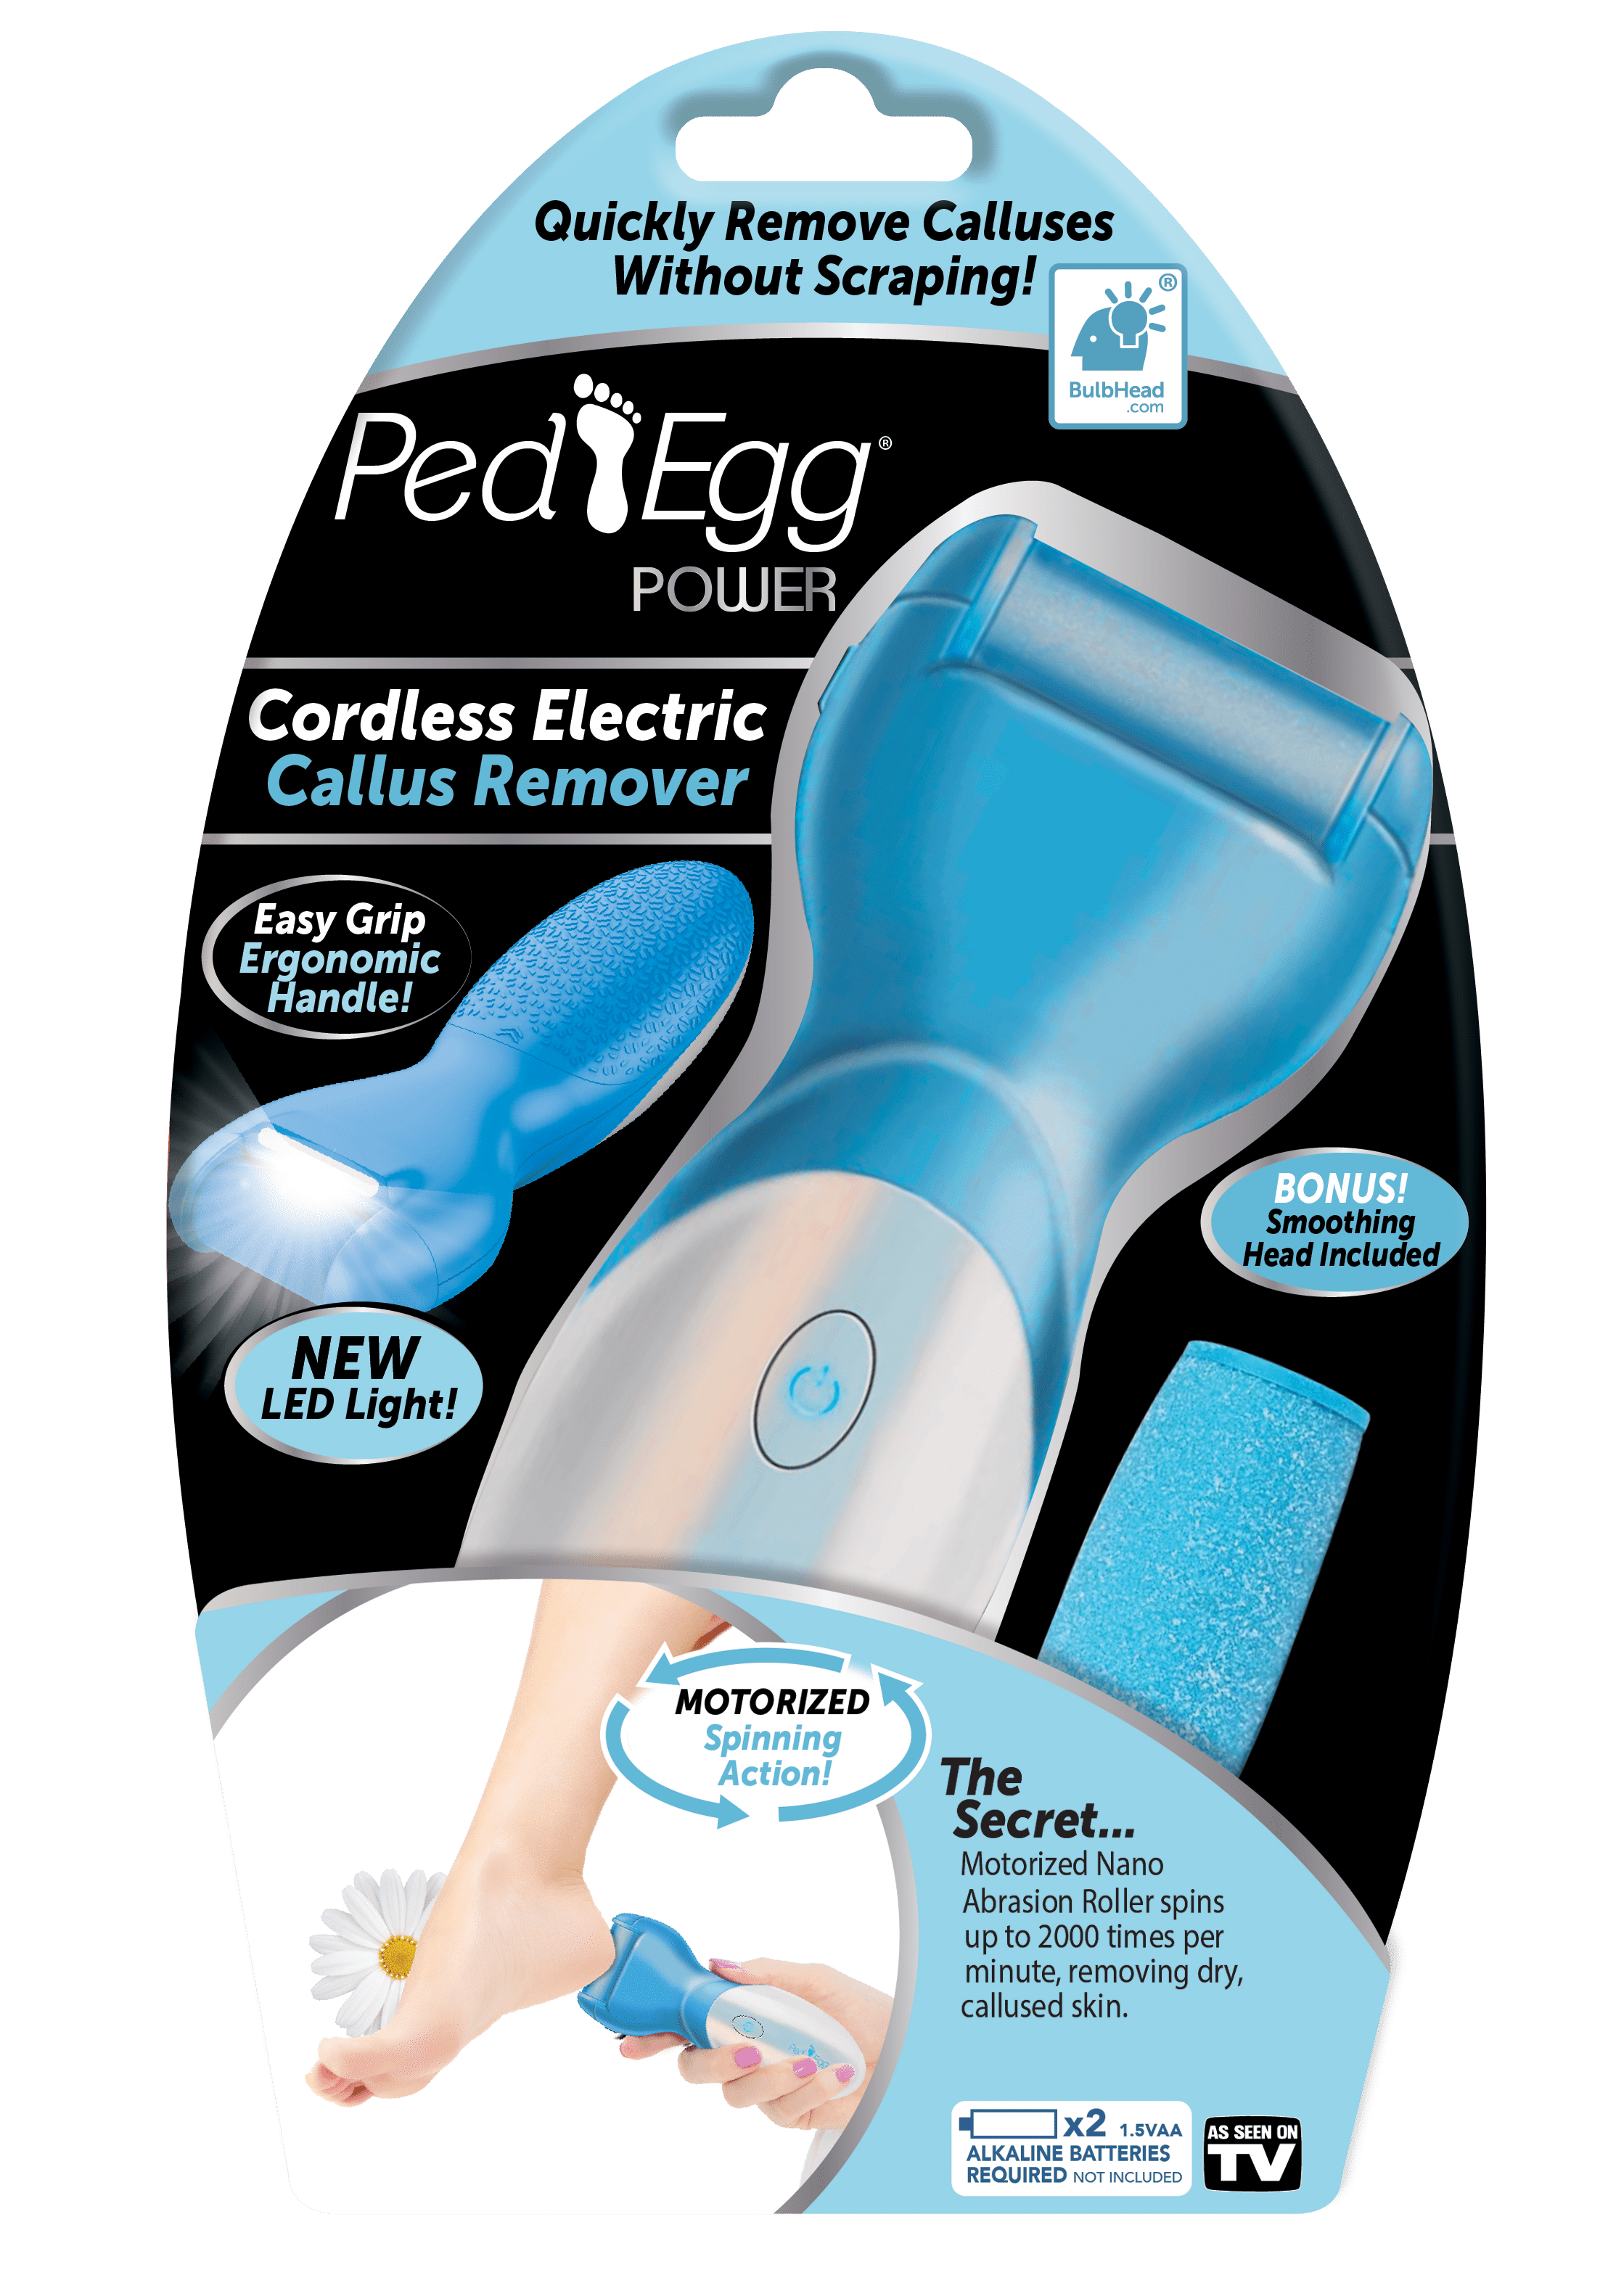 Dropship PedEgg Classic Callus Remover As Seen On TV New Look Remove  Calluses & Dry Skin to Sell Online at a Lower Price